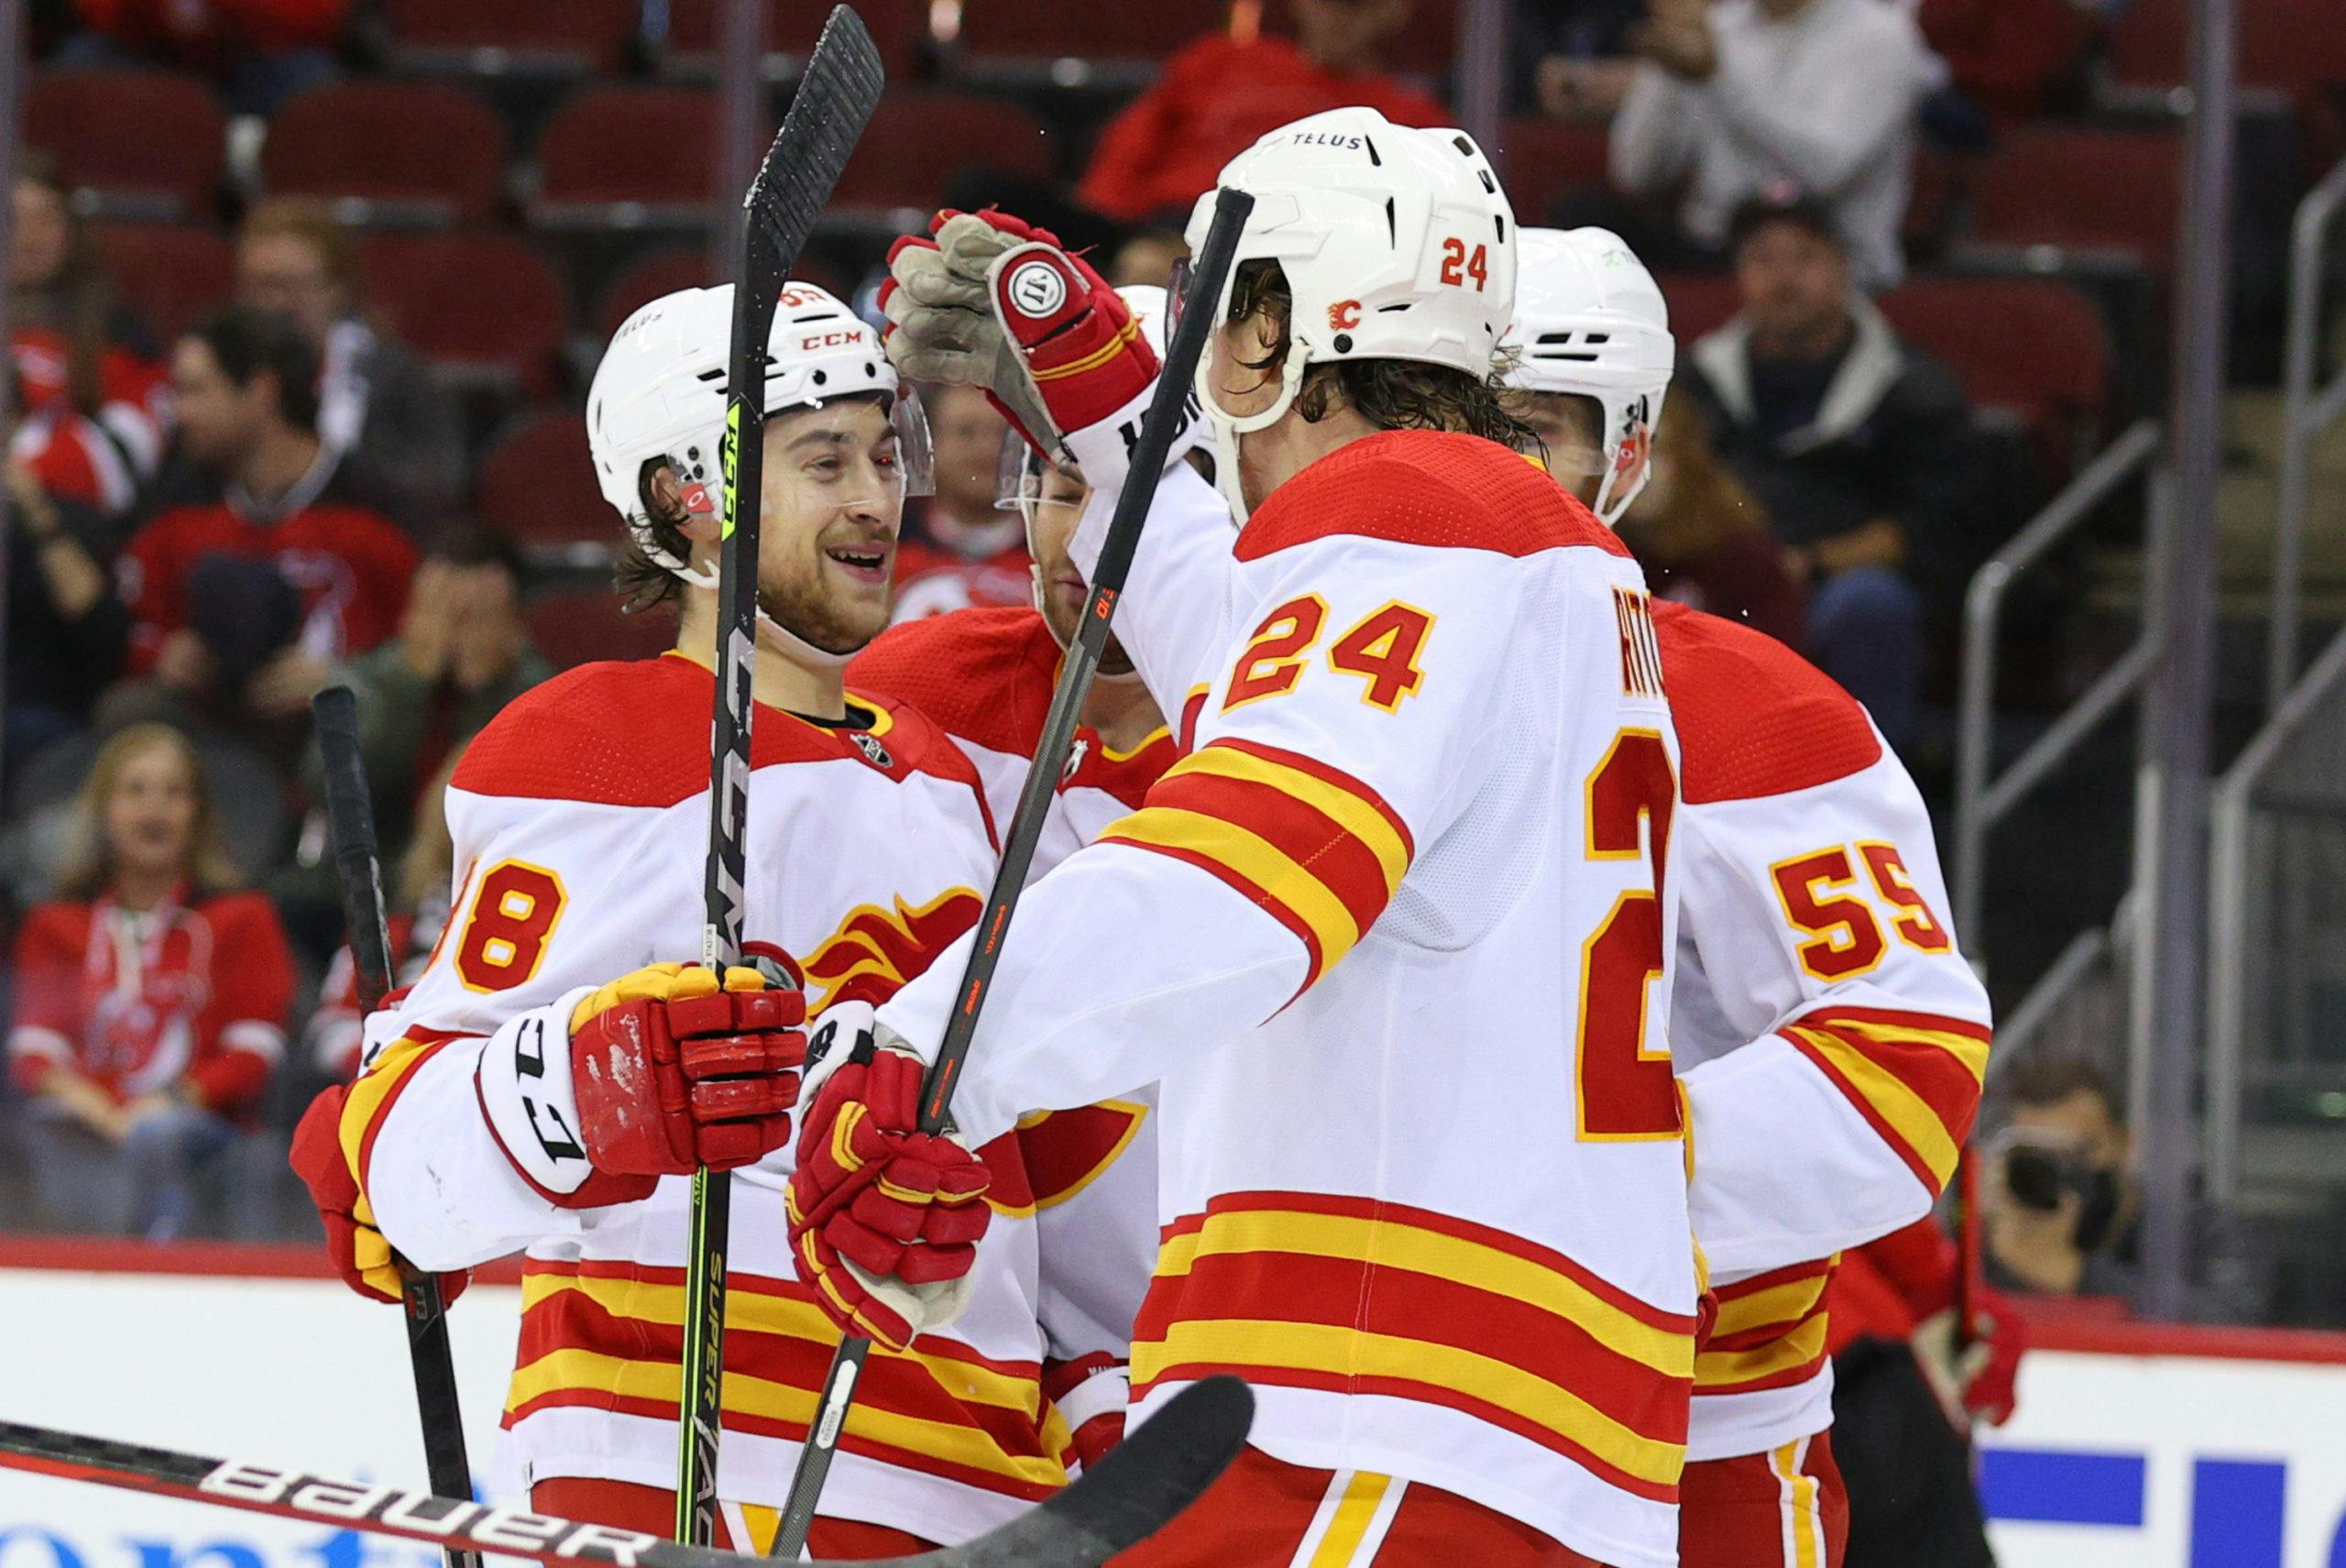 Mangiapane, Lindholm and Flames stay hot in win over Devils